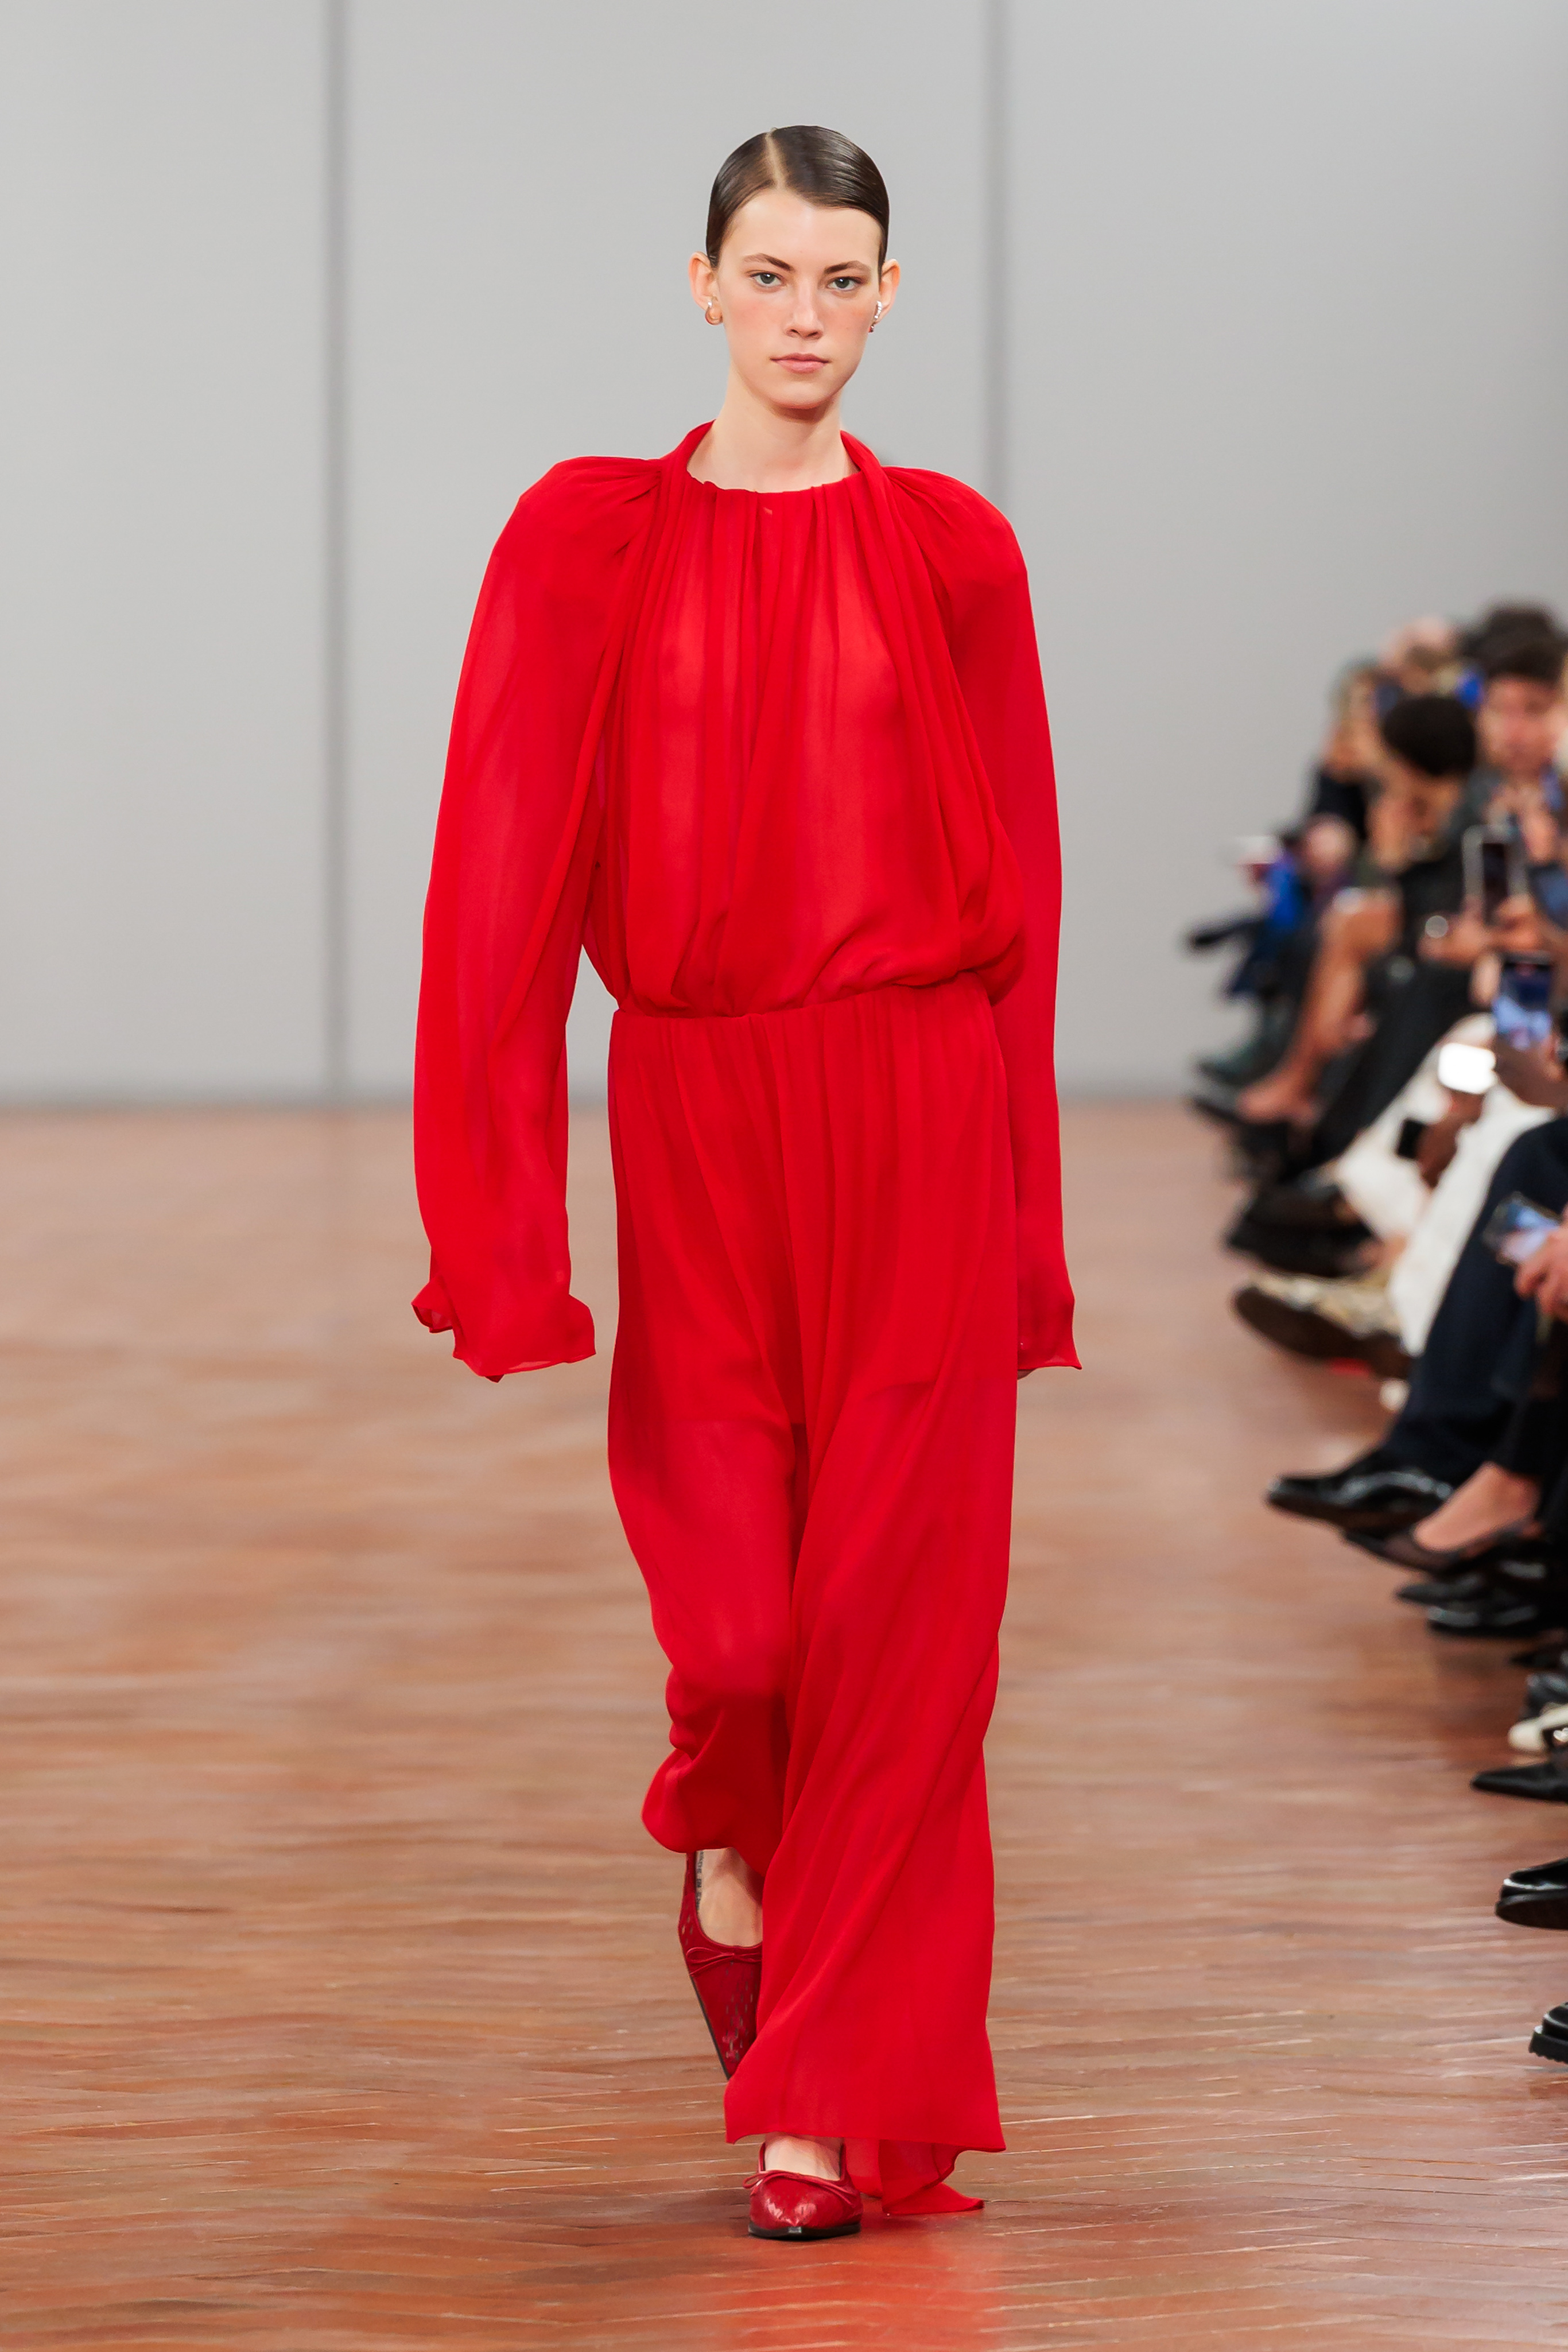 Model on runway in elegant red blouse and trousers with puff sleeves, standing confidently